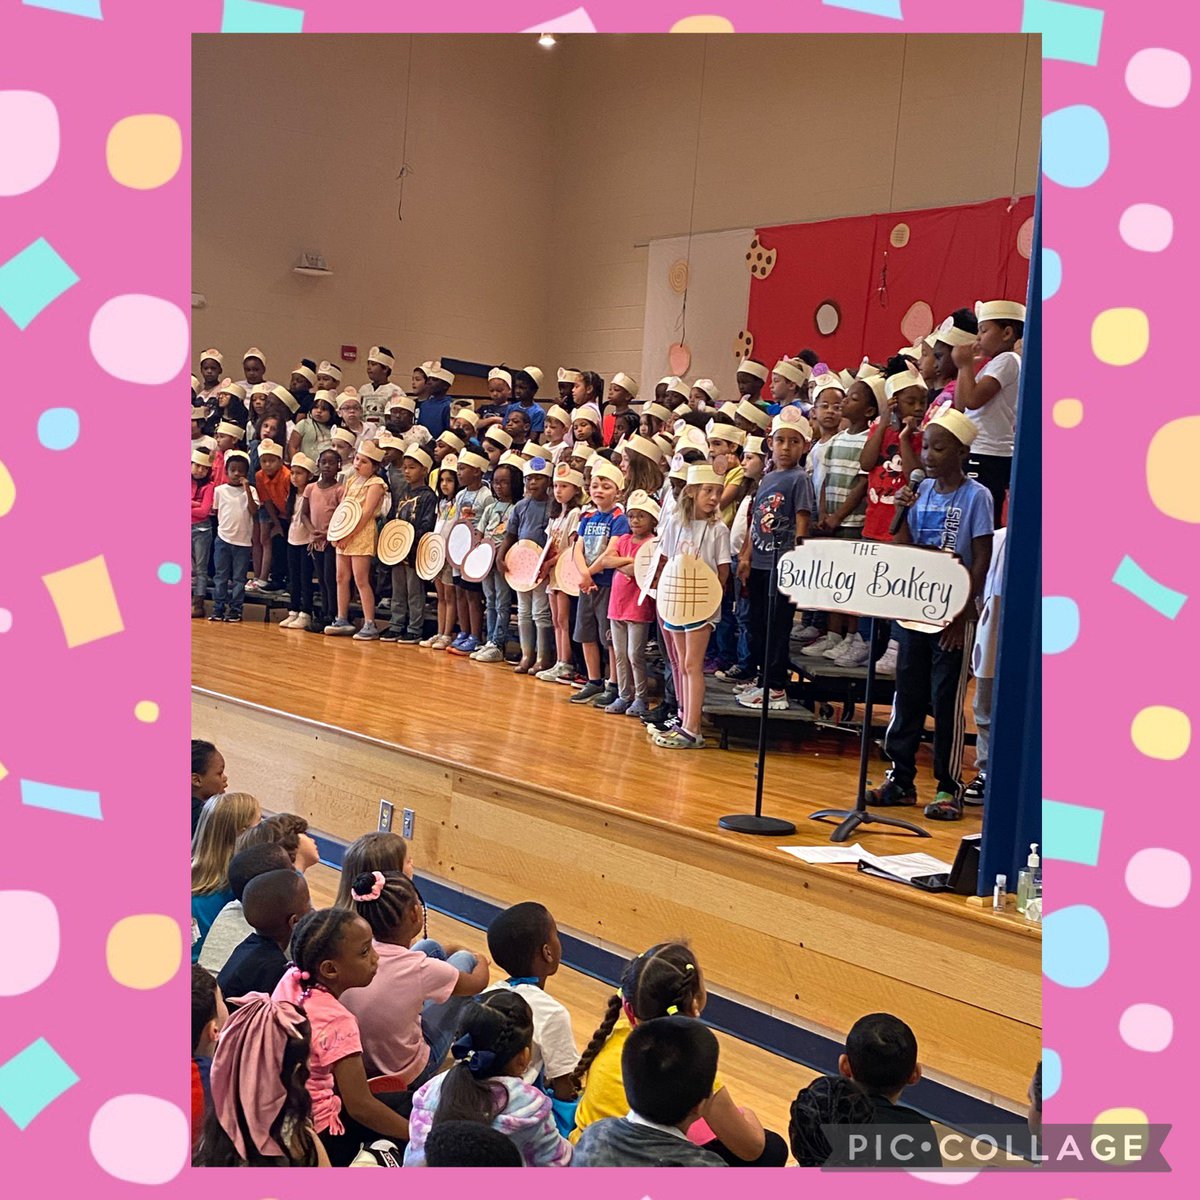 The sweetest cookies in the @WakelonES Bulldog Bakery!✨✨We had the sweetest spring musical performance from our PK-1st grade students.